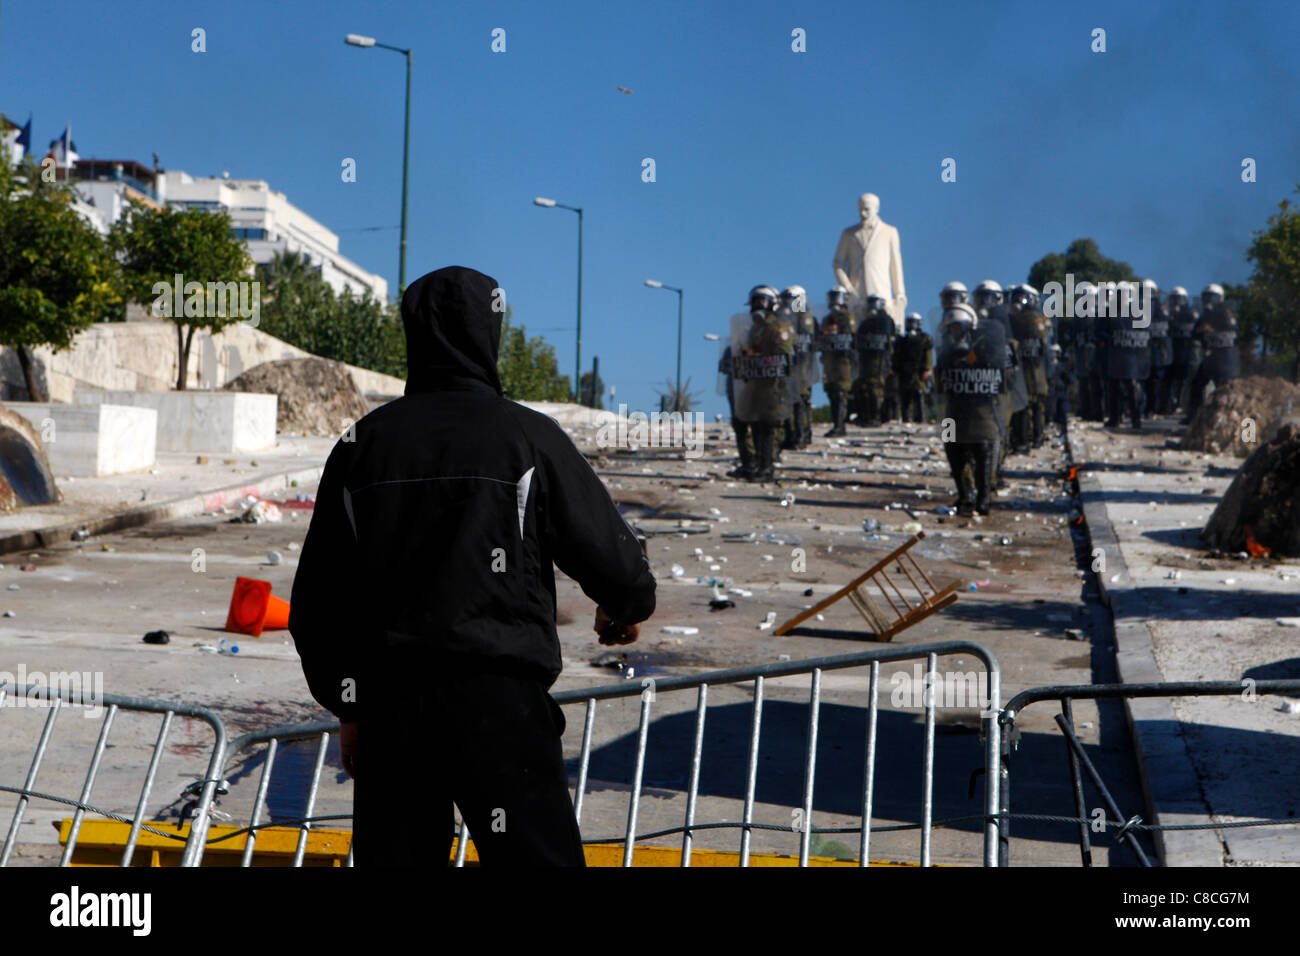 Athens Greece, 19/10/2011. Protesters clash with riot police, throwing fire bombs and stones. They were among thousands of people protesting in the Greek capital against proposed austerity measures. Stock Photo